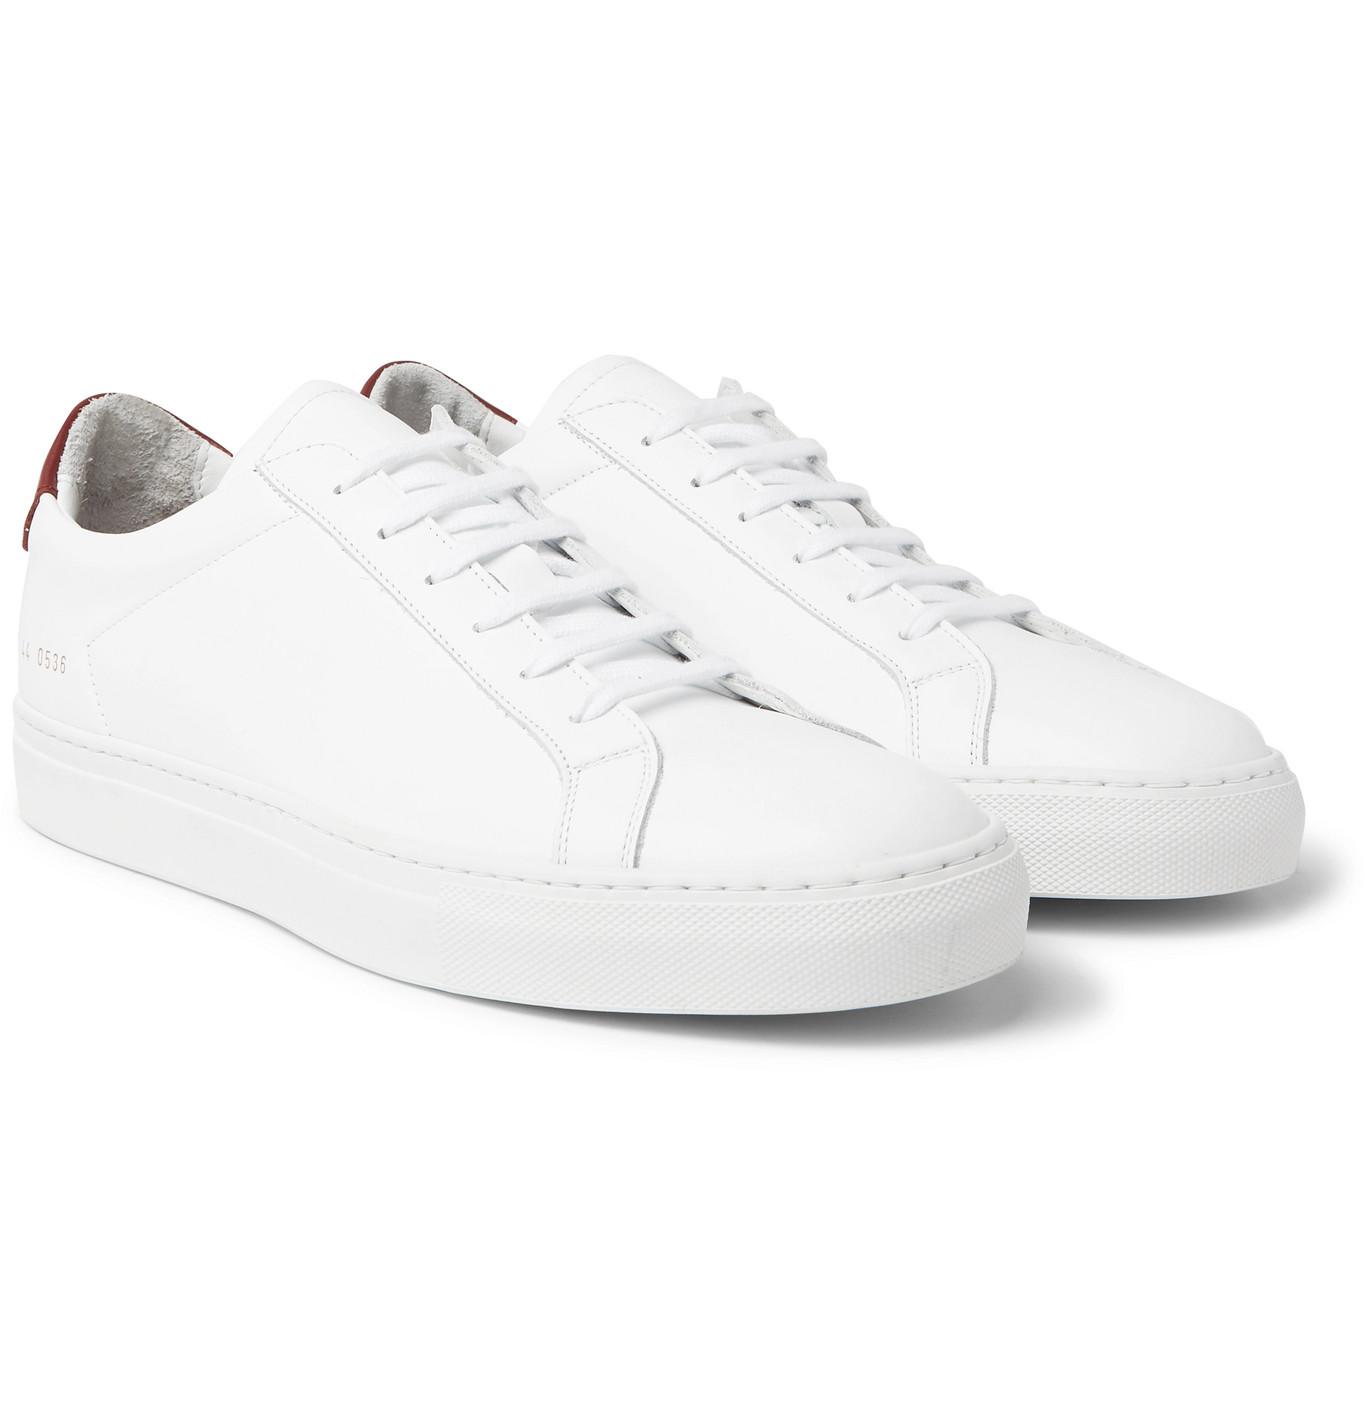 Common Projects Retro Low Leather Sneakers in White for Men - Lyst